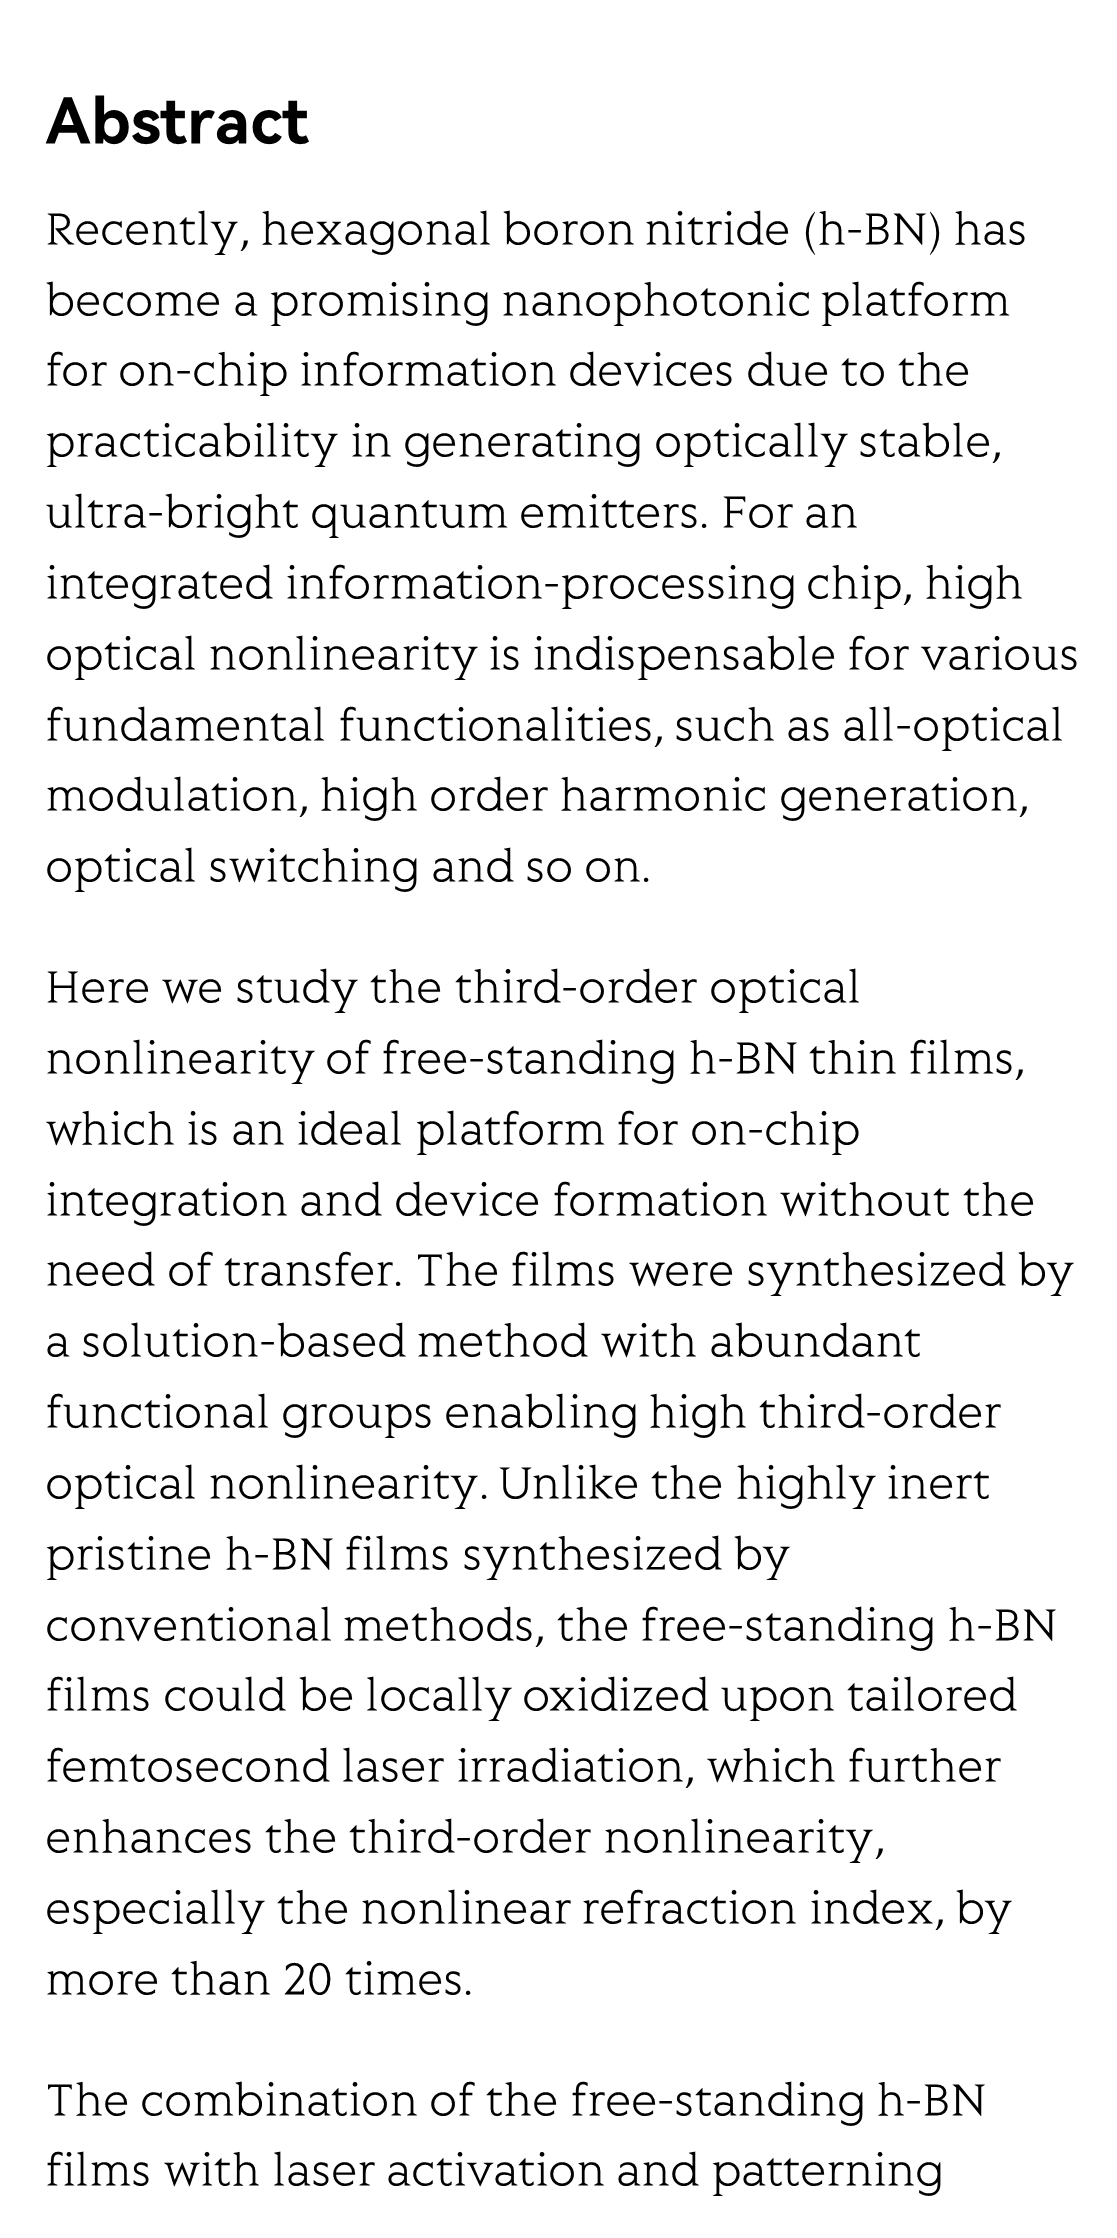 Giant and light modifiable third-order optical nonlinearity in a free-standing h-BN film_2